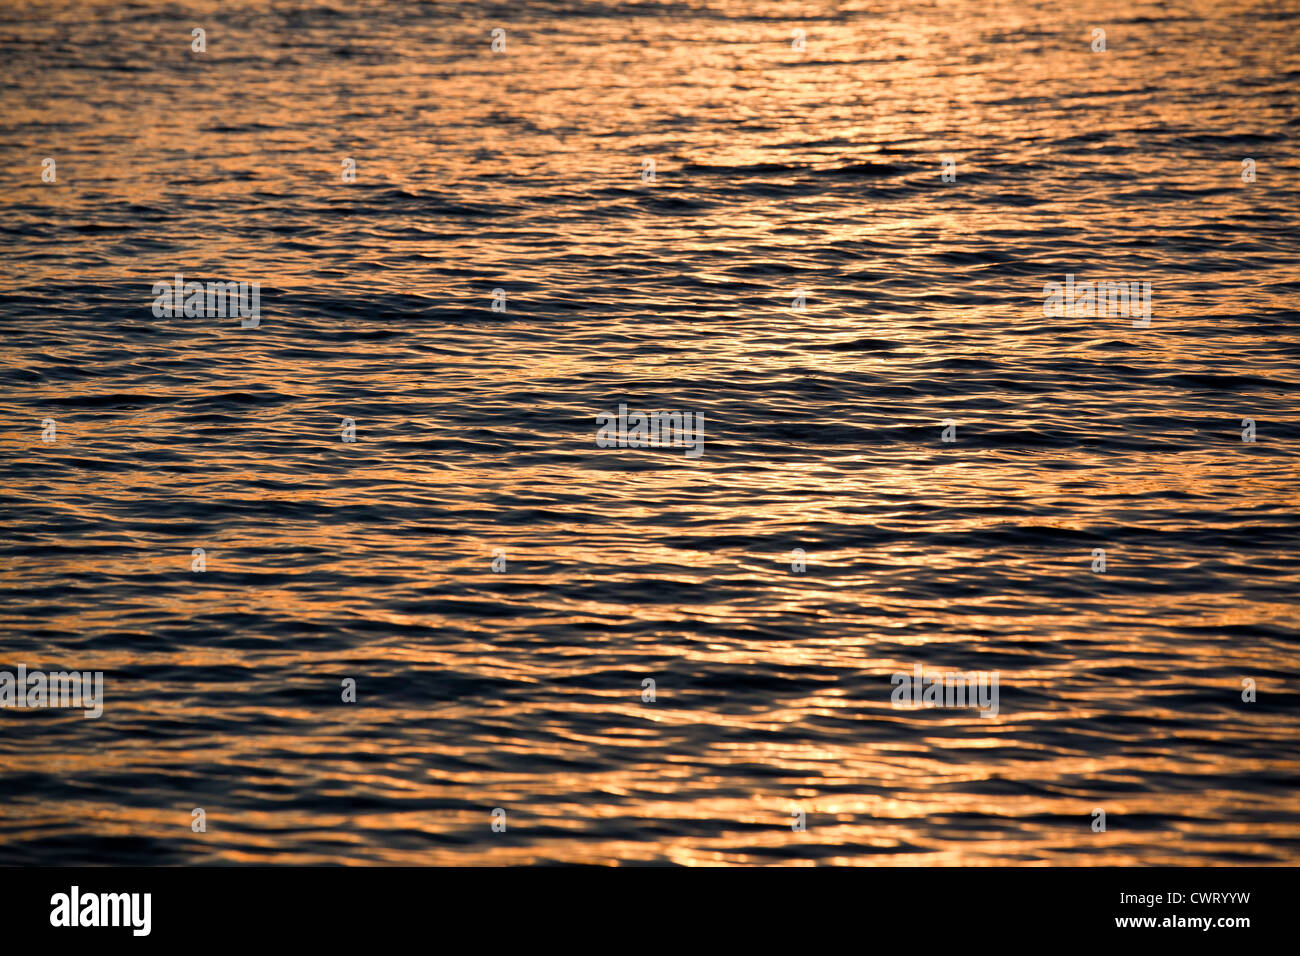 Sea water for background or texture on sunset Stock Photo